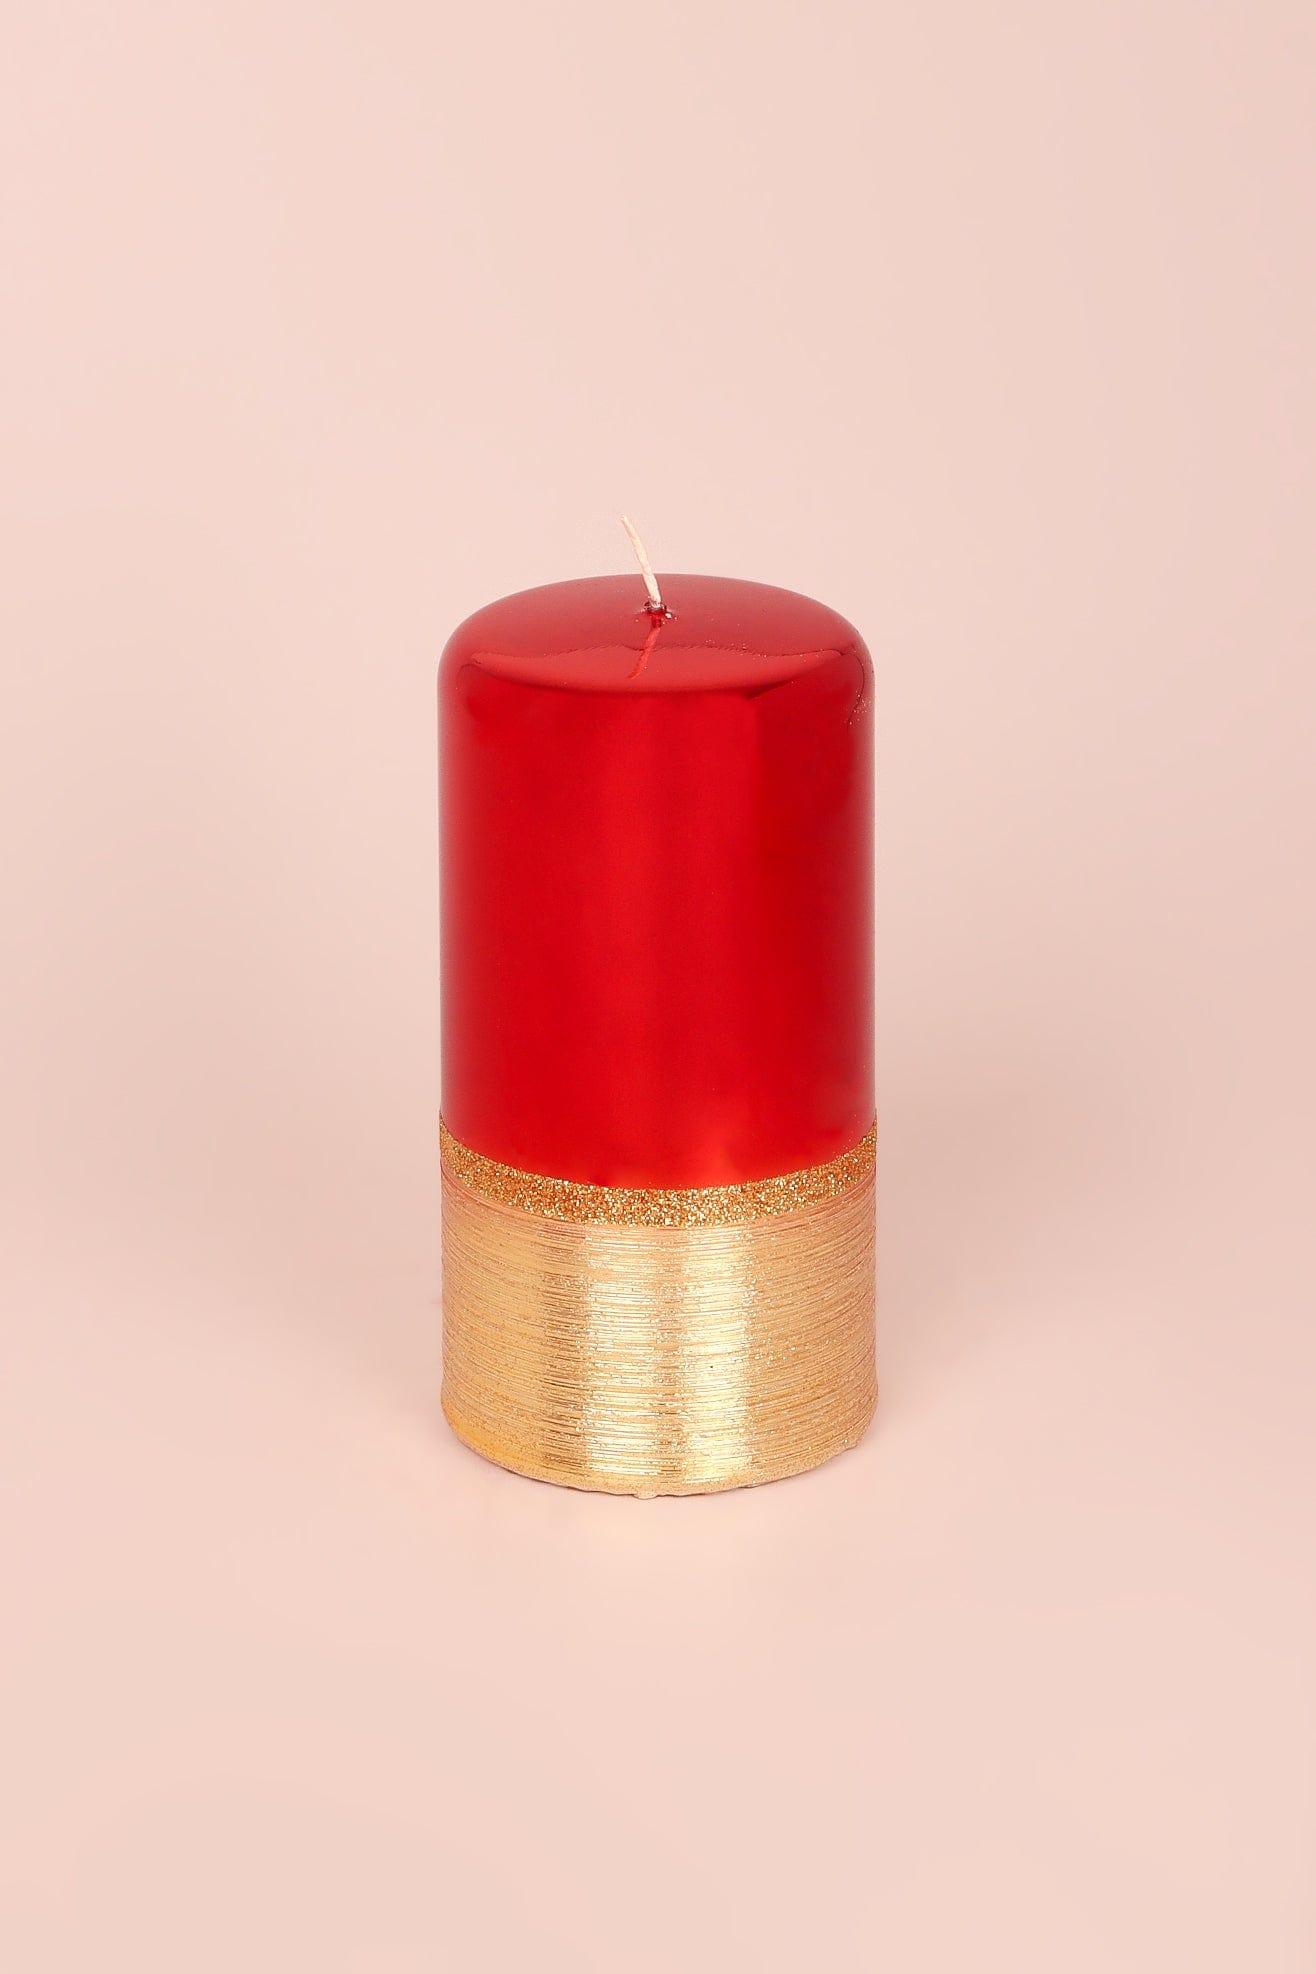 G Decor Candles Red / Large pillar Red and Gold Two Tone Glitter Glass Effect Reflecting Plain Gloss Pillar Candles